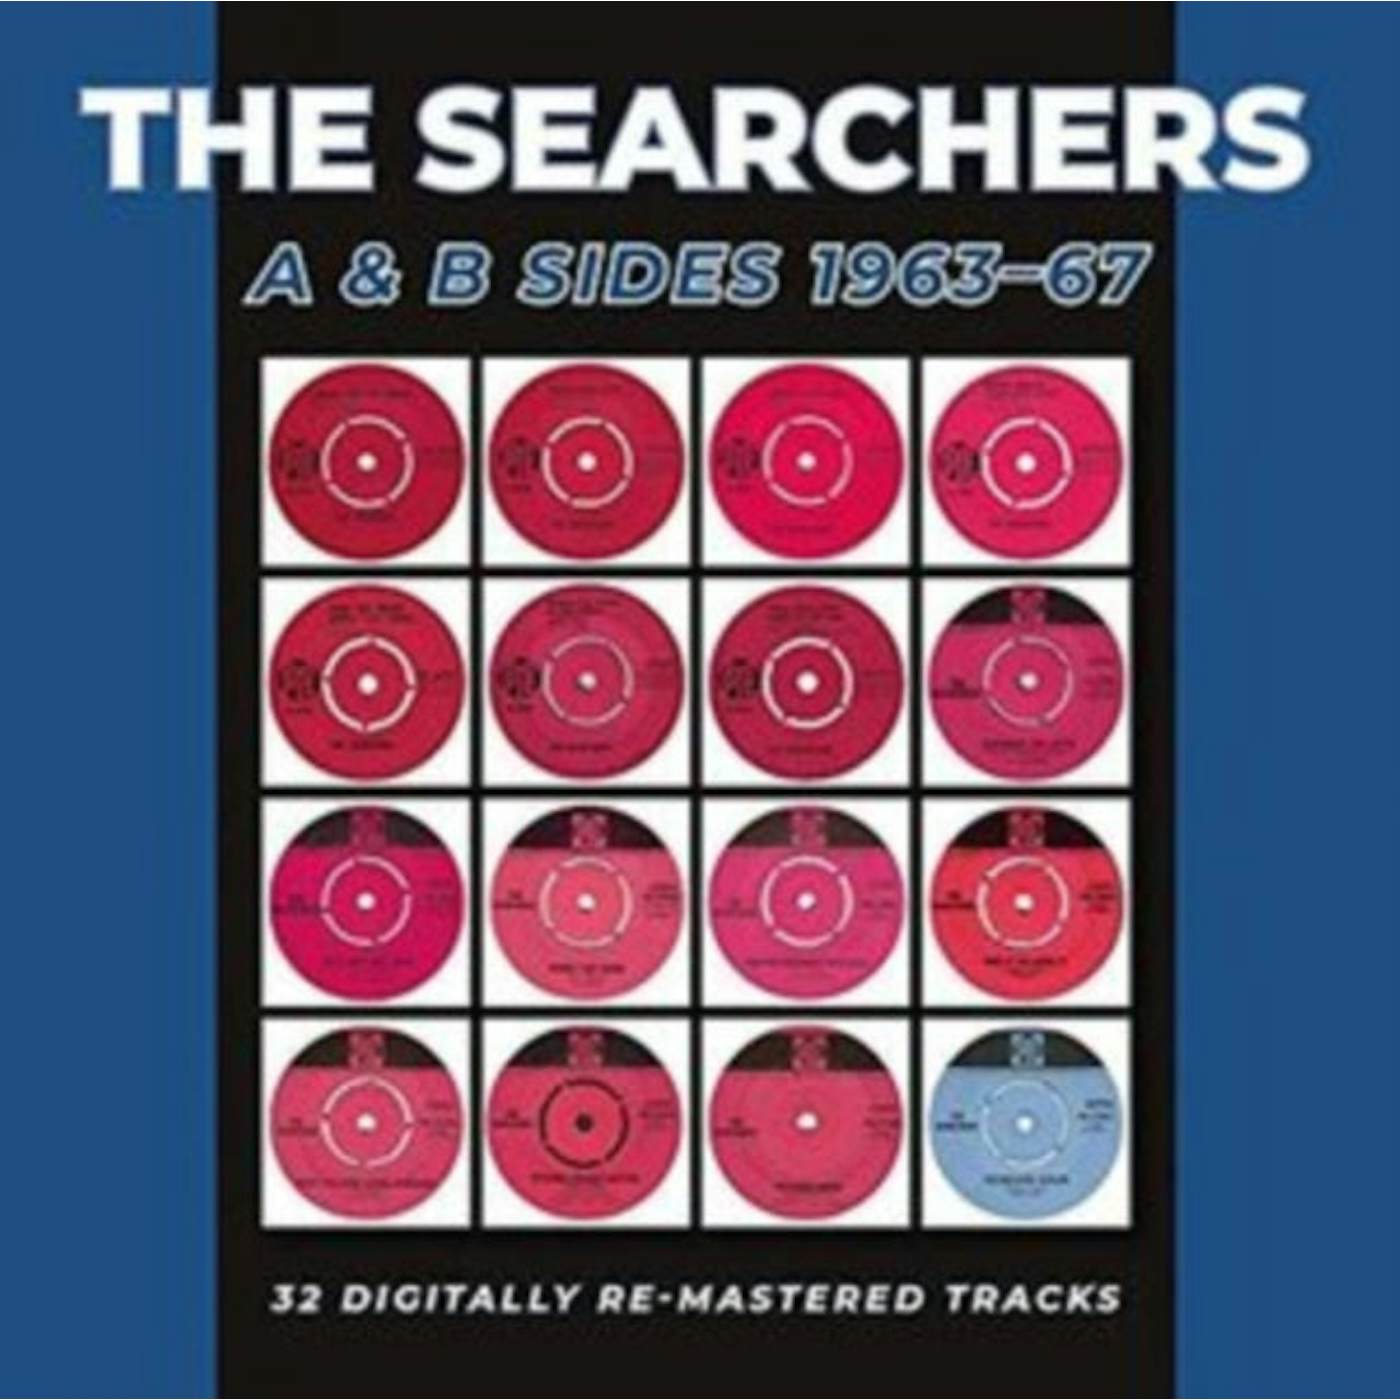 The Searchers CD - A & B Sides 19 63-67